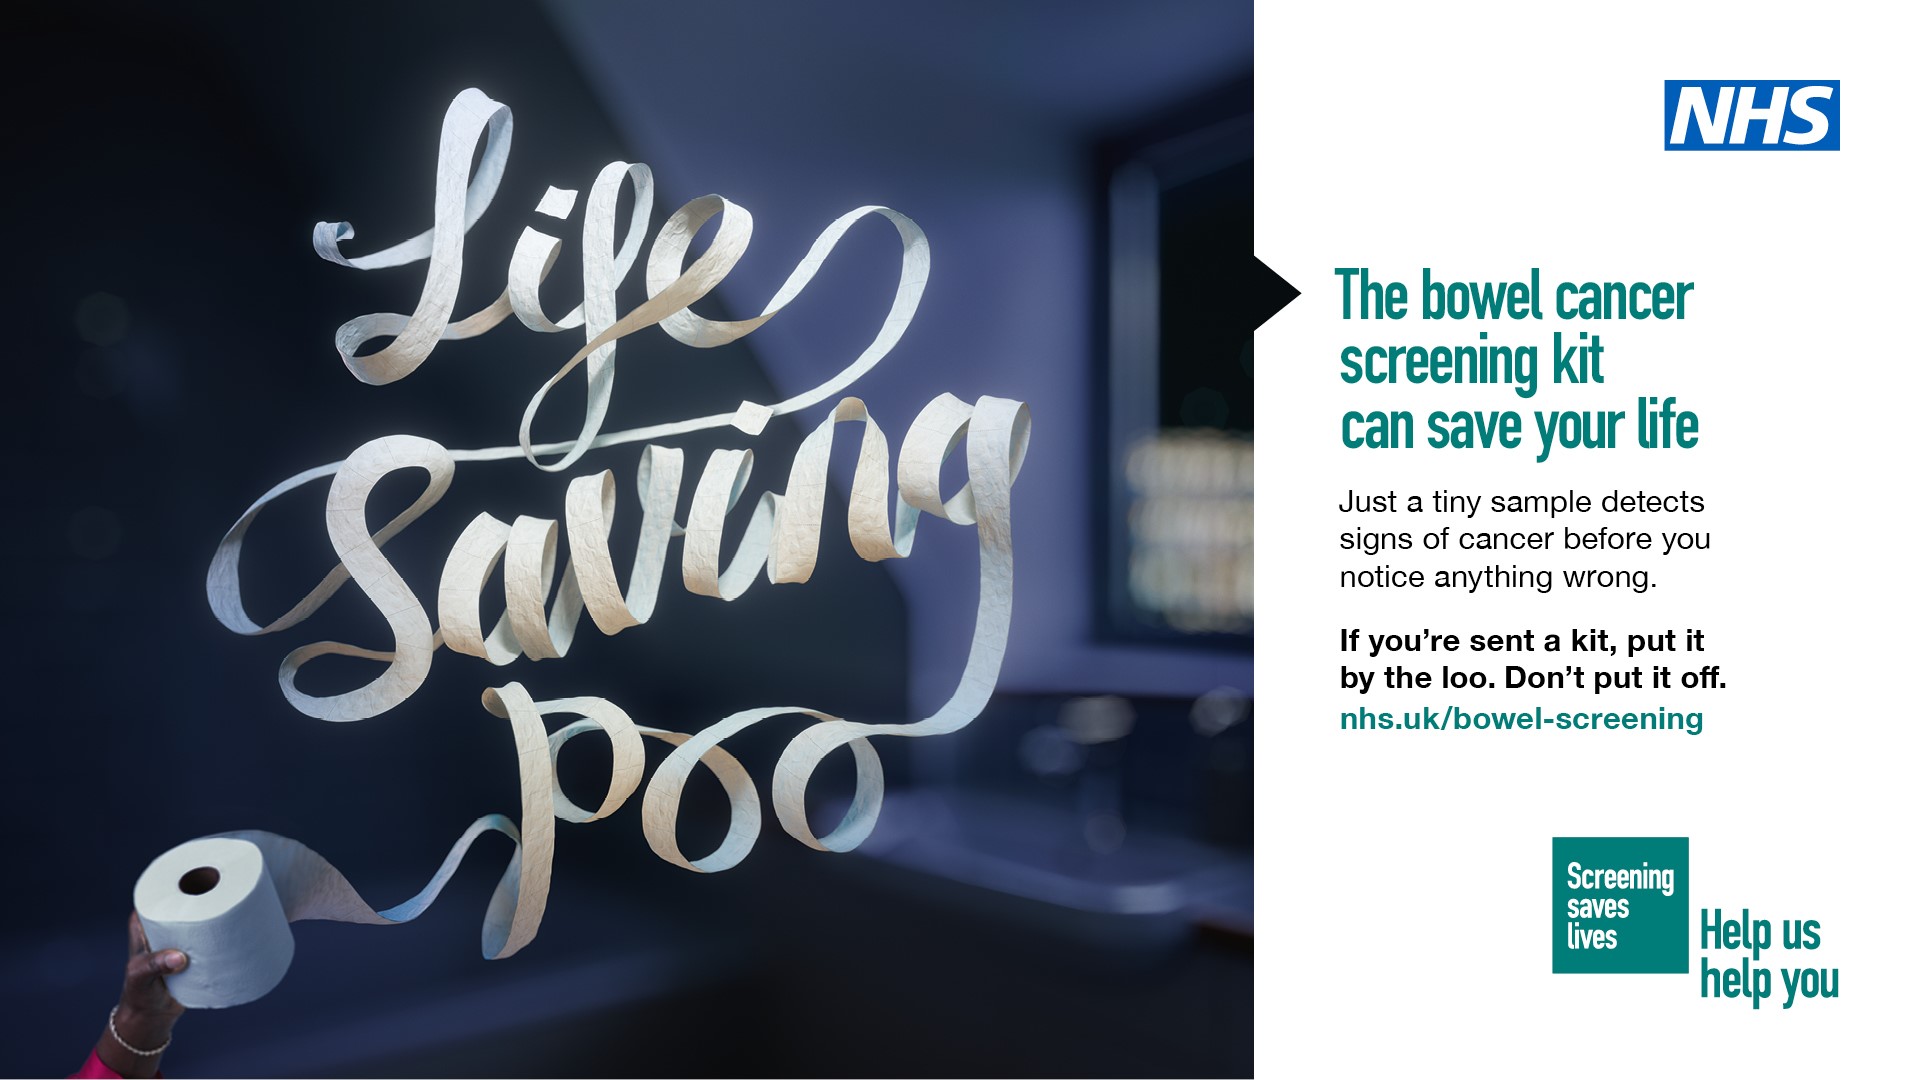 The image is reads ‘life saving poo’ in ribbons of toilet roll. Next to the image is the NHS logo and lettering that reads ‘the bowel cancer screening kit can save your life, just a tiny sample detects signs of cancer before you notice anything wrong. If you’re sent a kit, out it by the loo. Don't put it off.'  